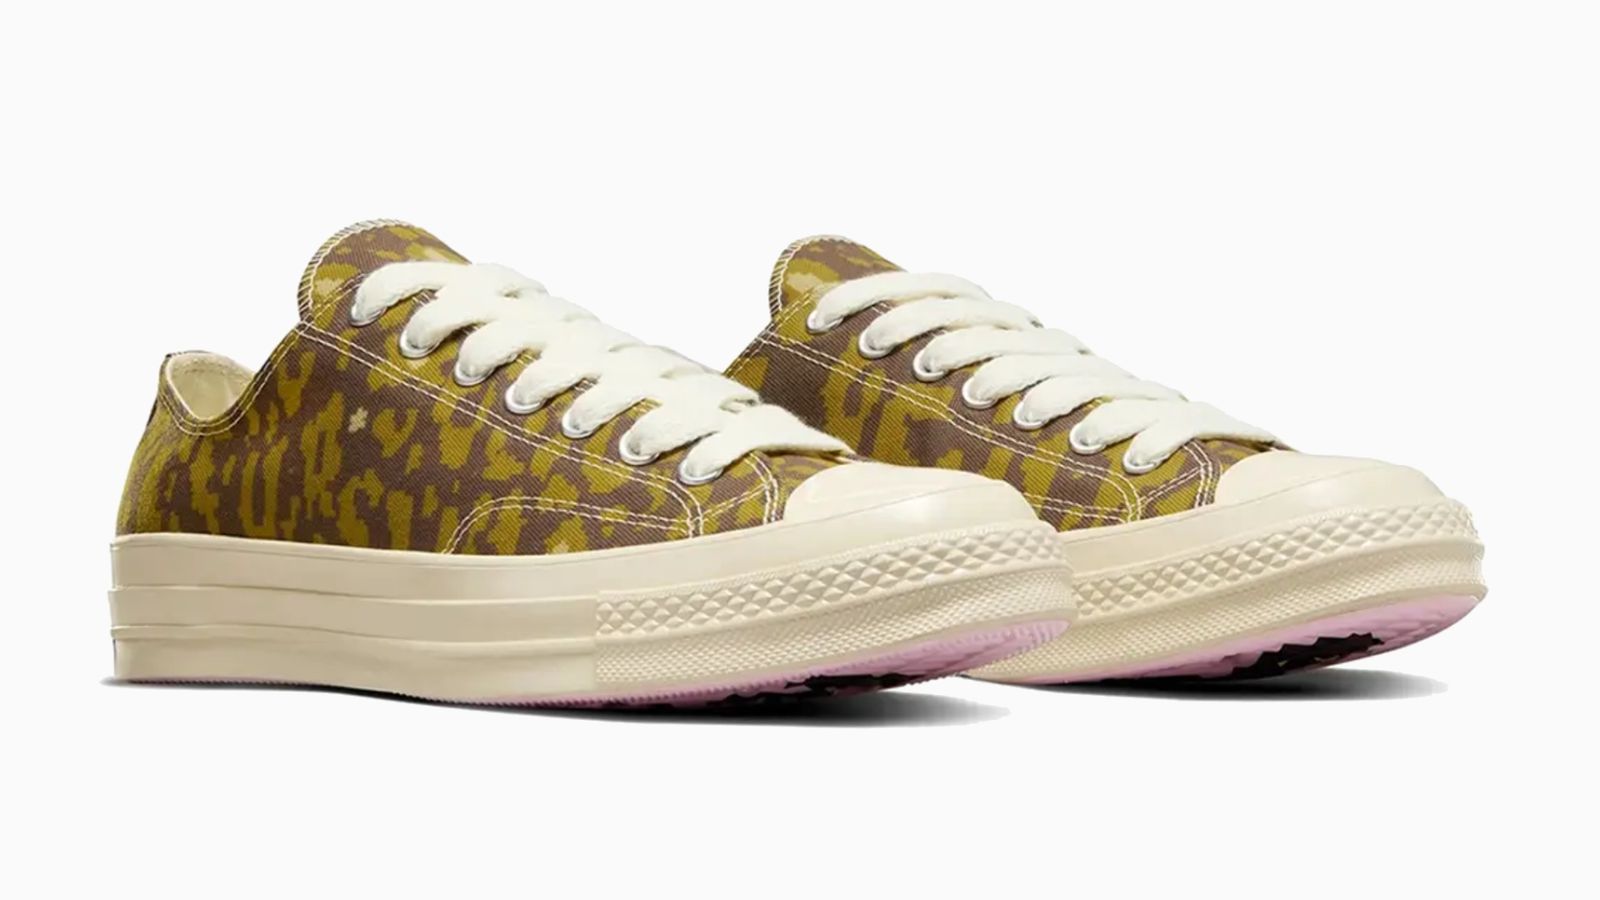 Tyler, The Creator x Converse Chuck 70 Low "Digital Leopard Khaki" product image of a brown and khaki print pair of Converse low-tops featuring cream rubber soles and mudguards.